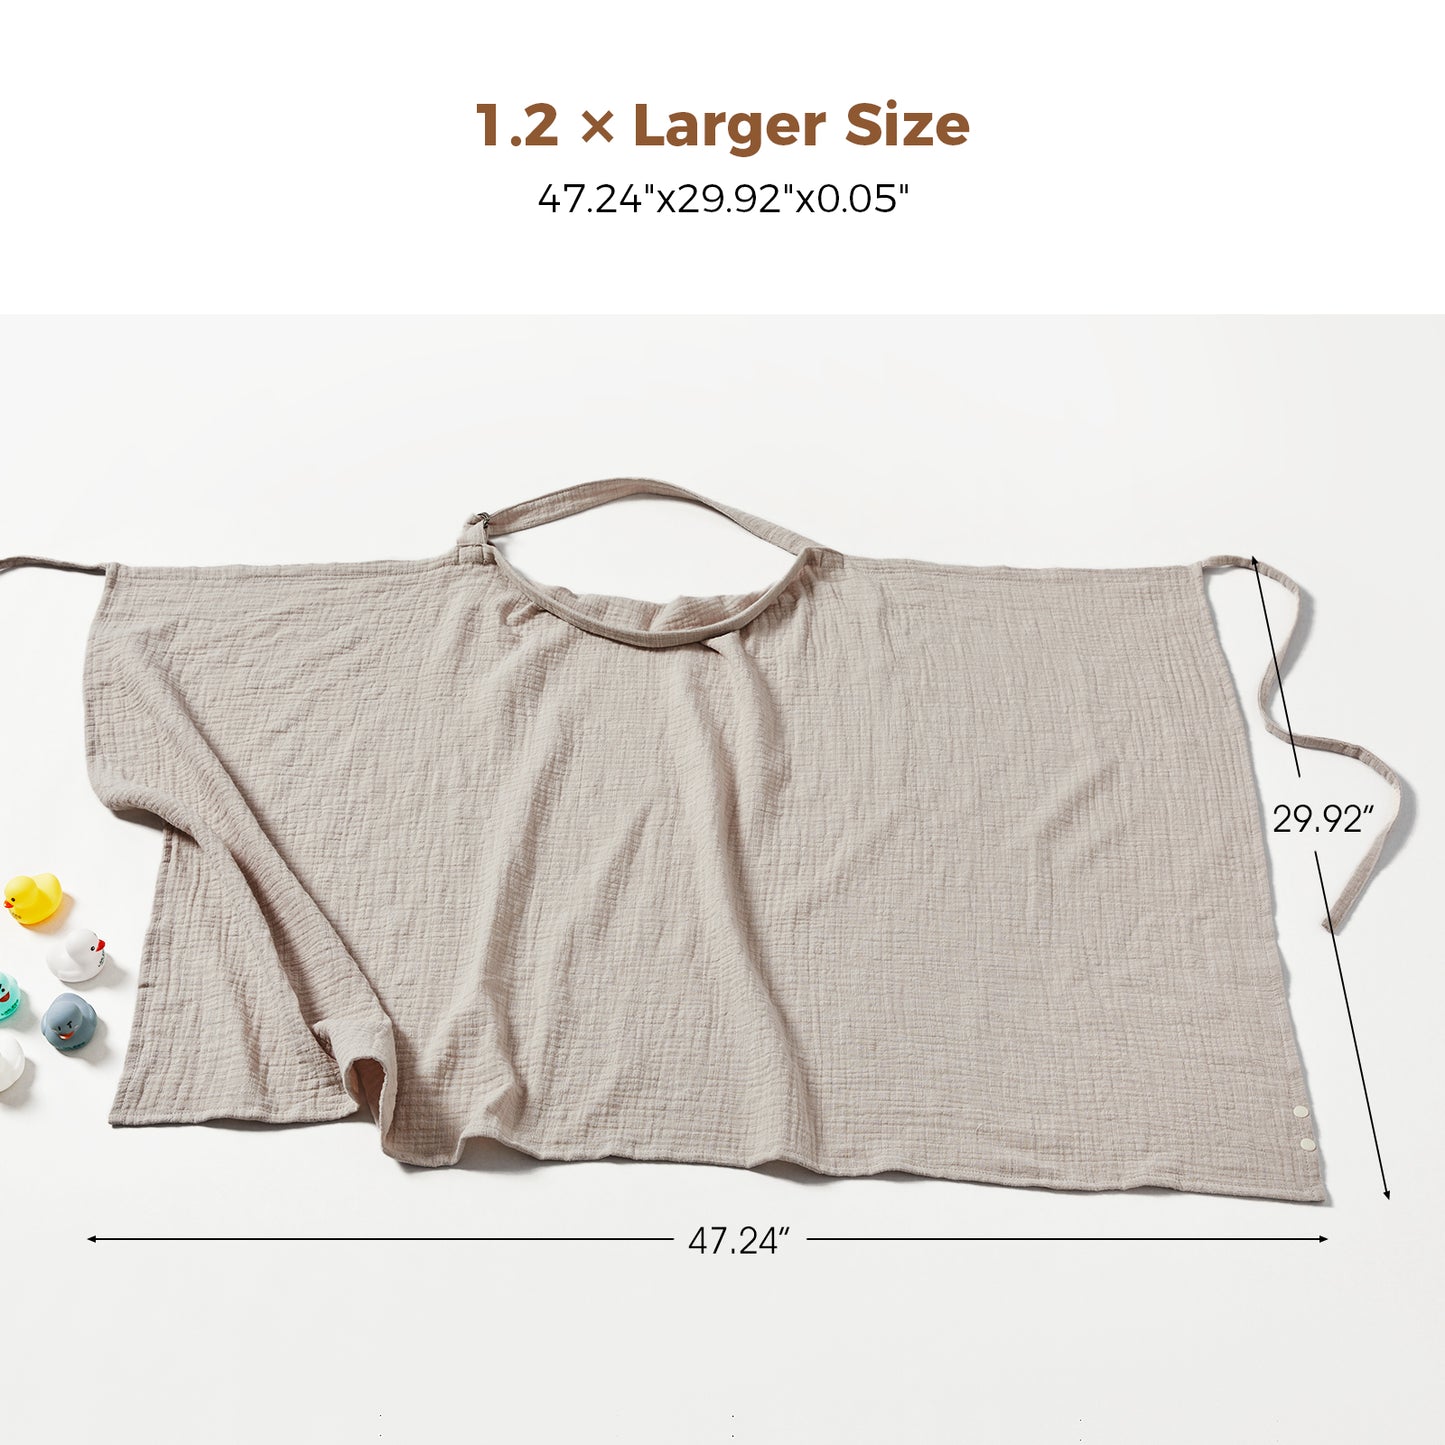 Soft Cotton Baby Nursing Cover with Adjustable Straps